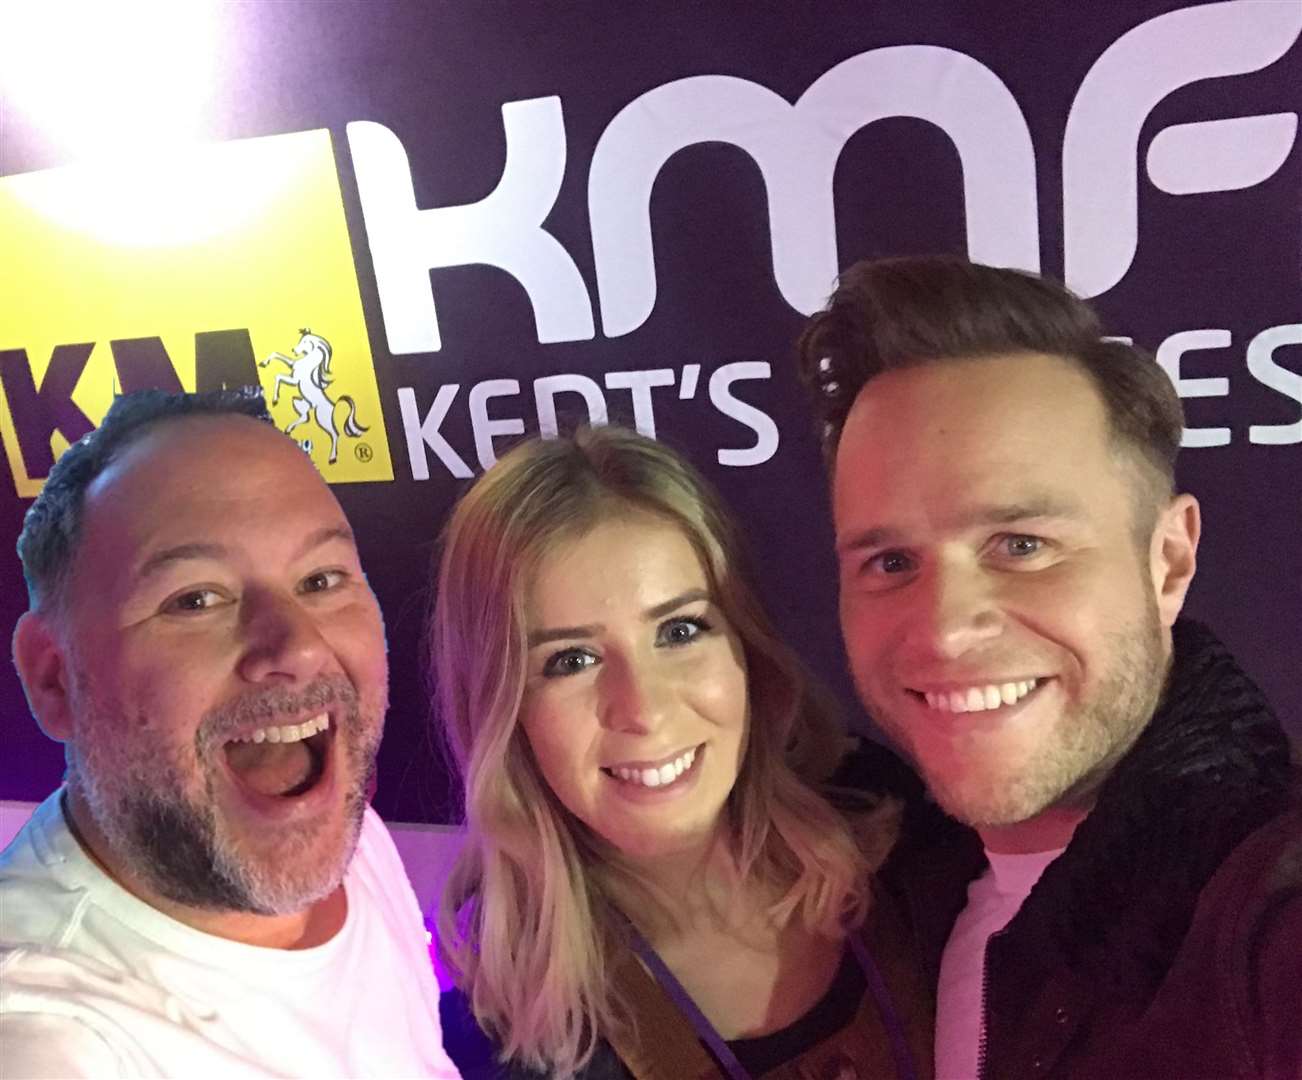 Olly Murs with kmfm's Breakfast Garry and Laura (pre-pandemic)